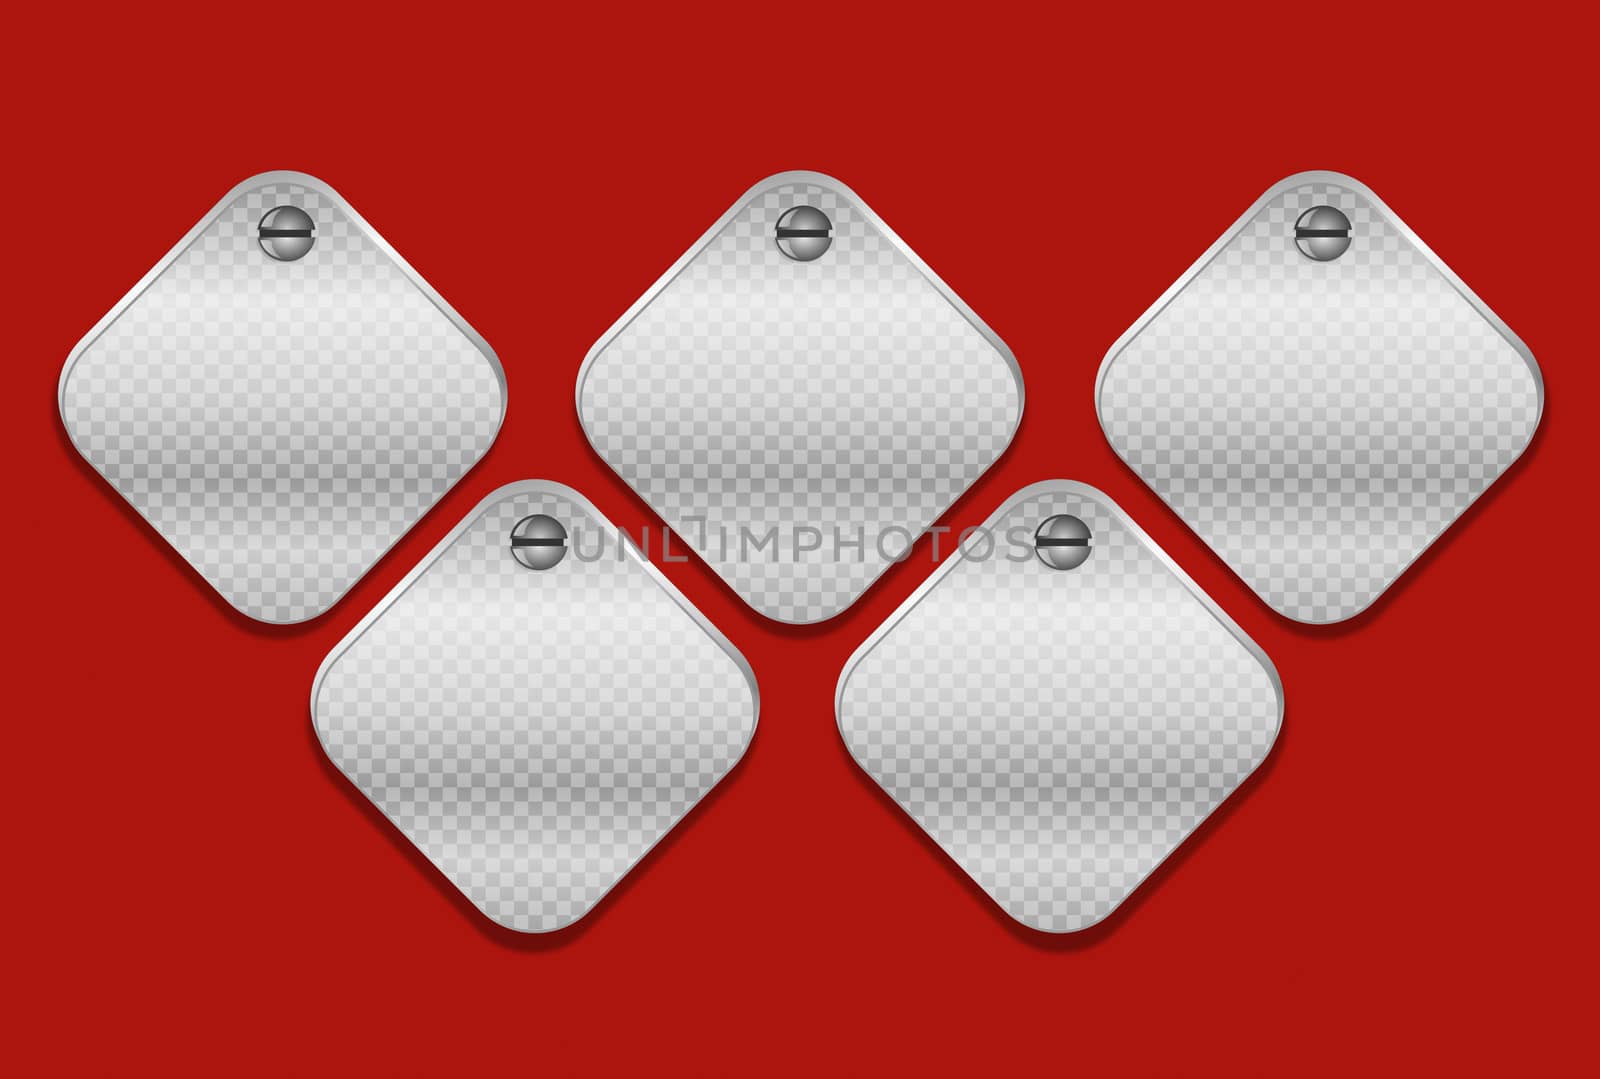 Metallic Sign Message Boards on Red Wall by RichieThakur